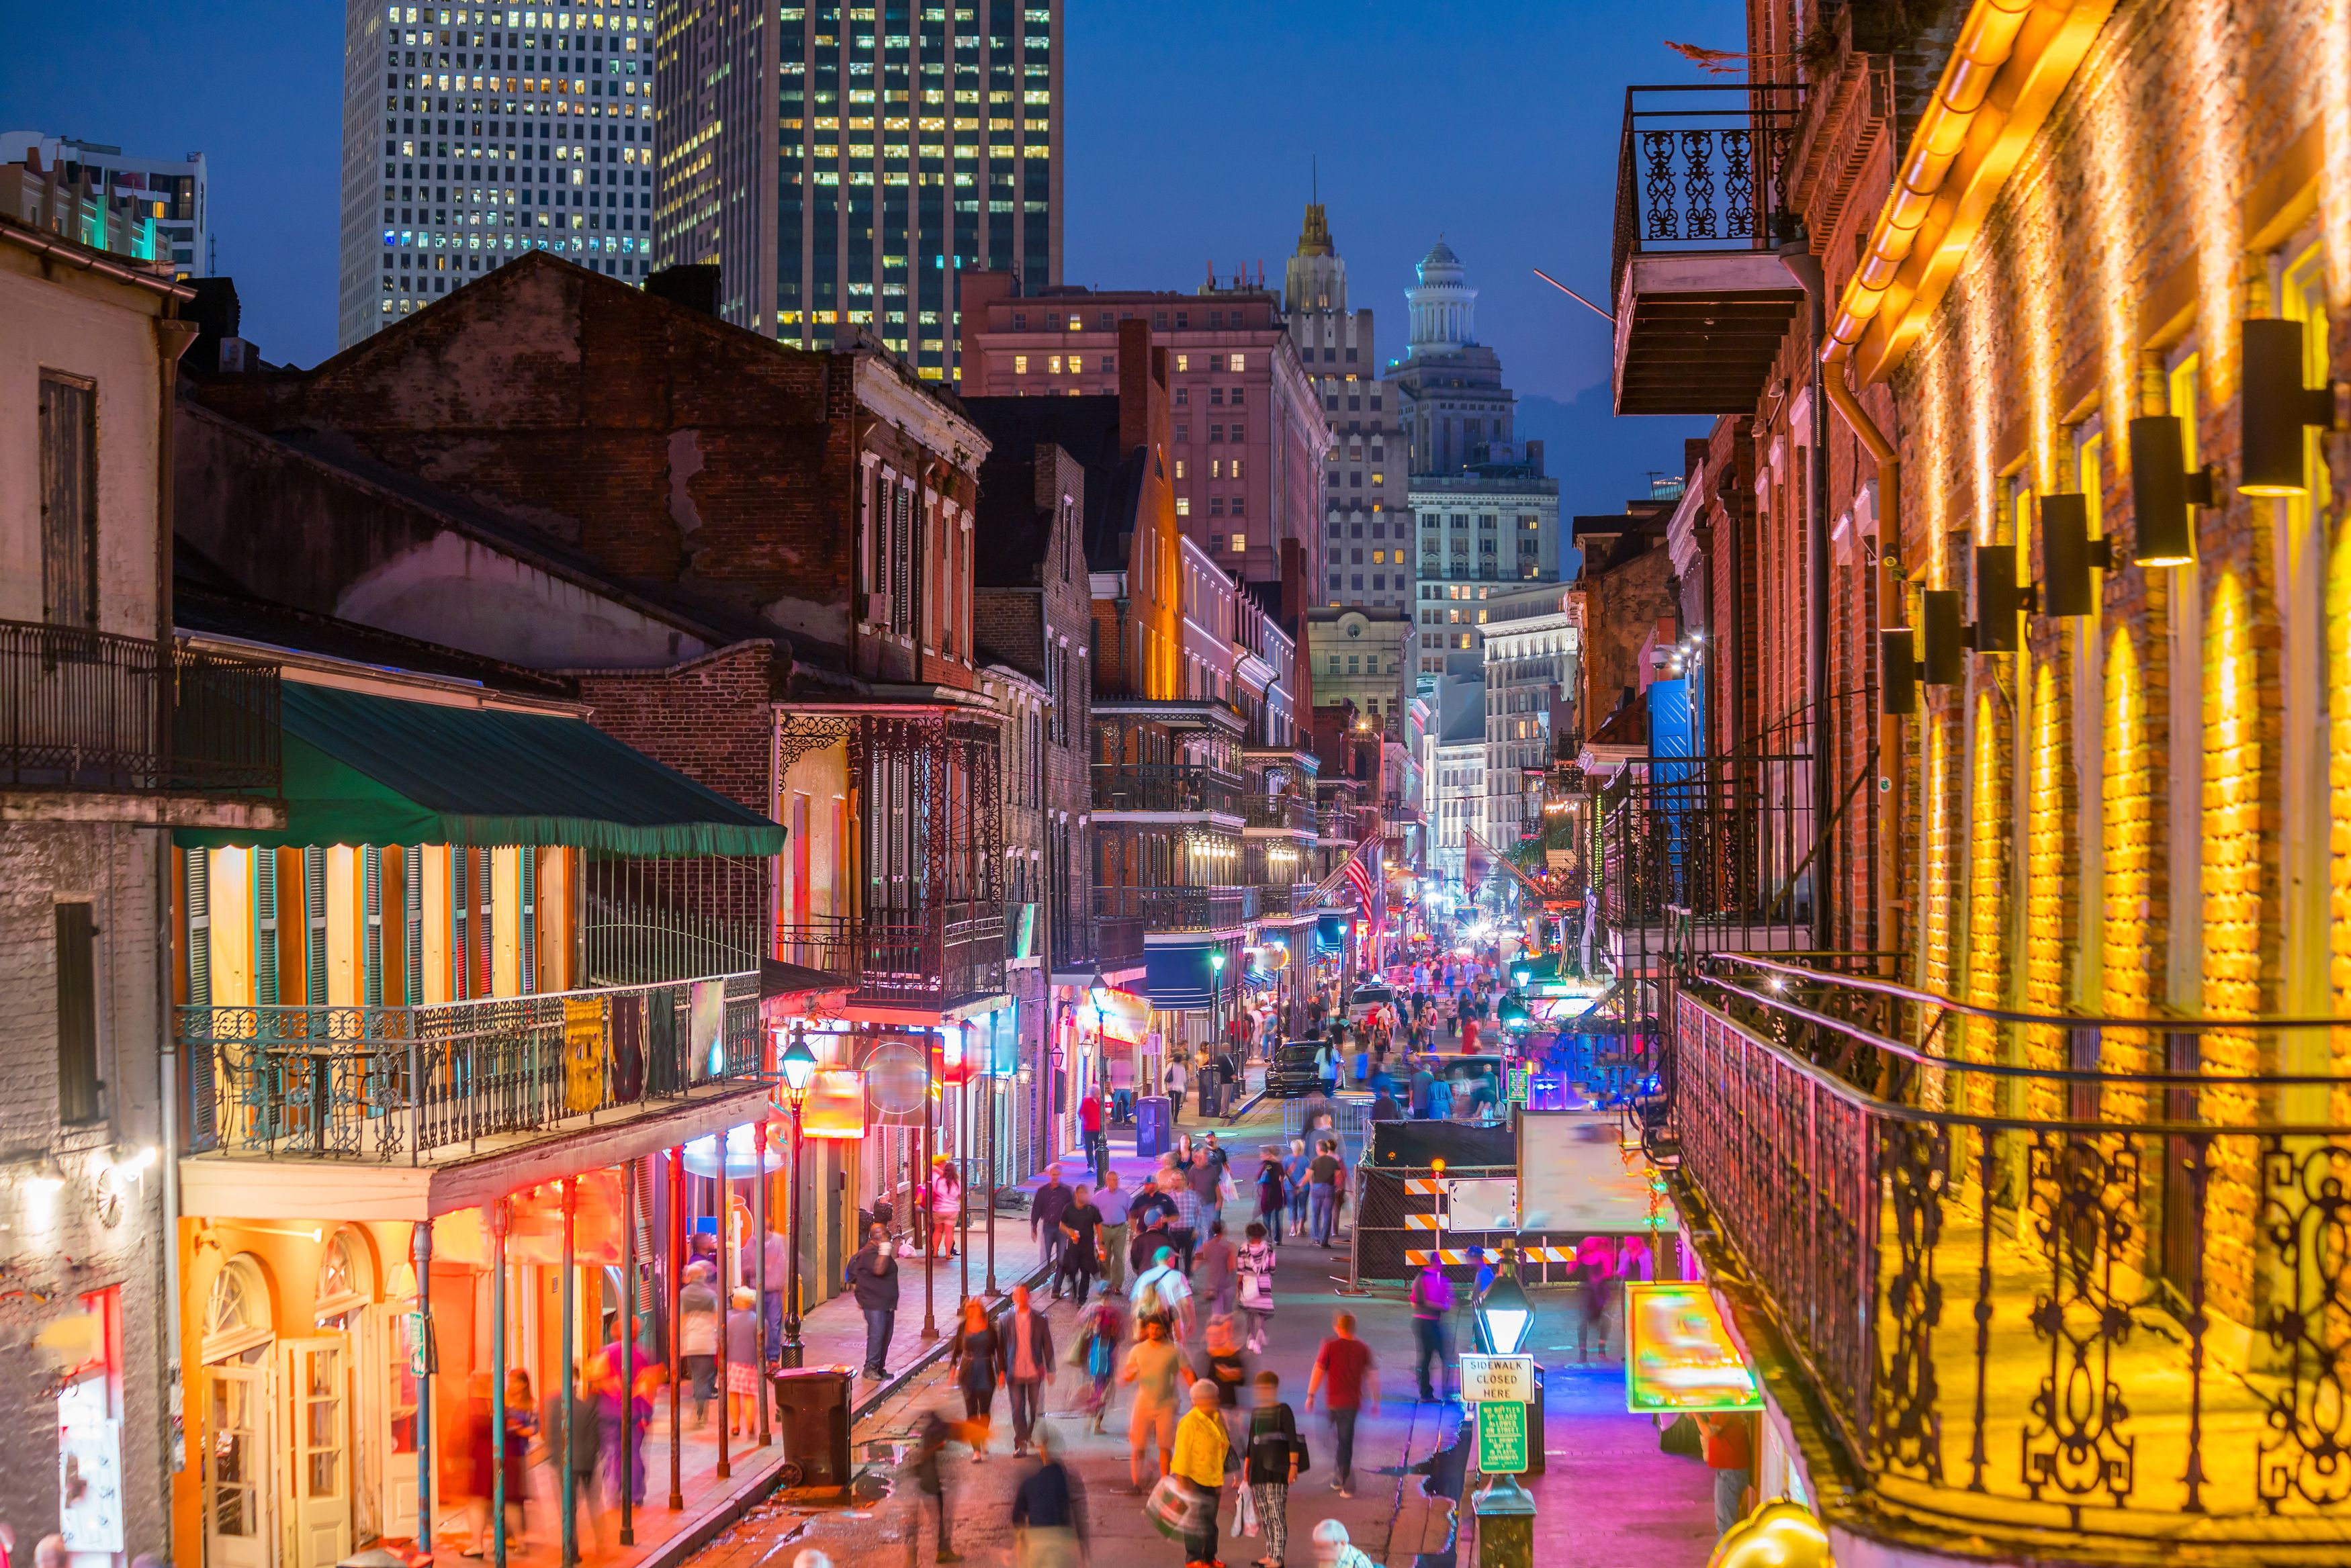 A busy French Quarter, New Orleans